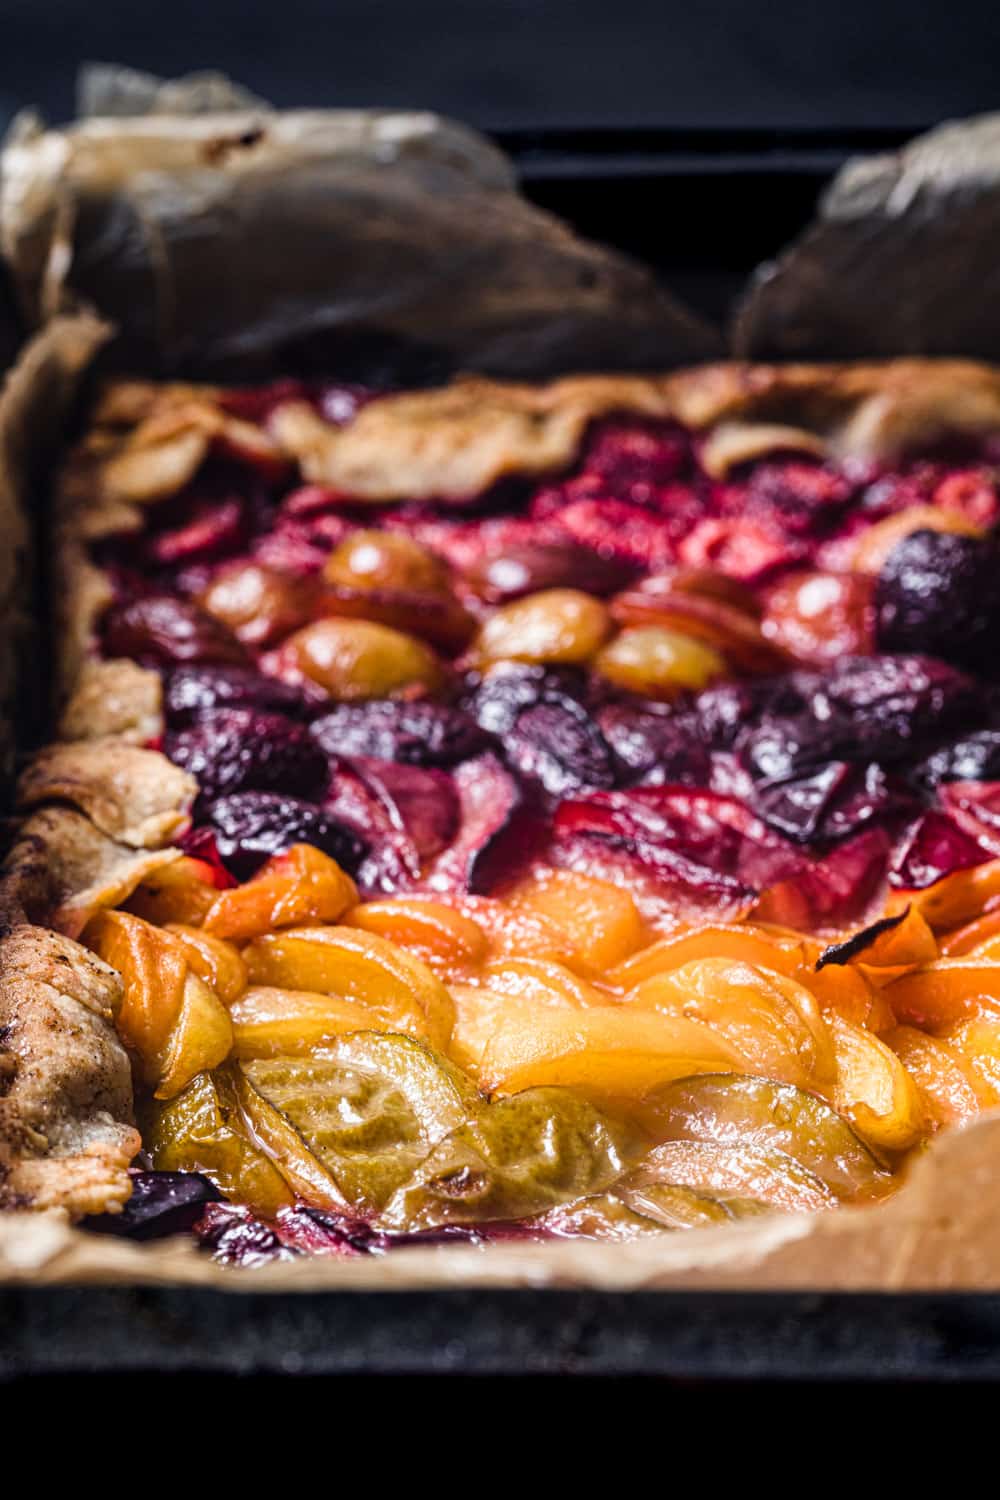 colorful stone fruit galette with plums, cherries, apricots, and strawberries; up close and side angle.